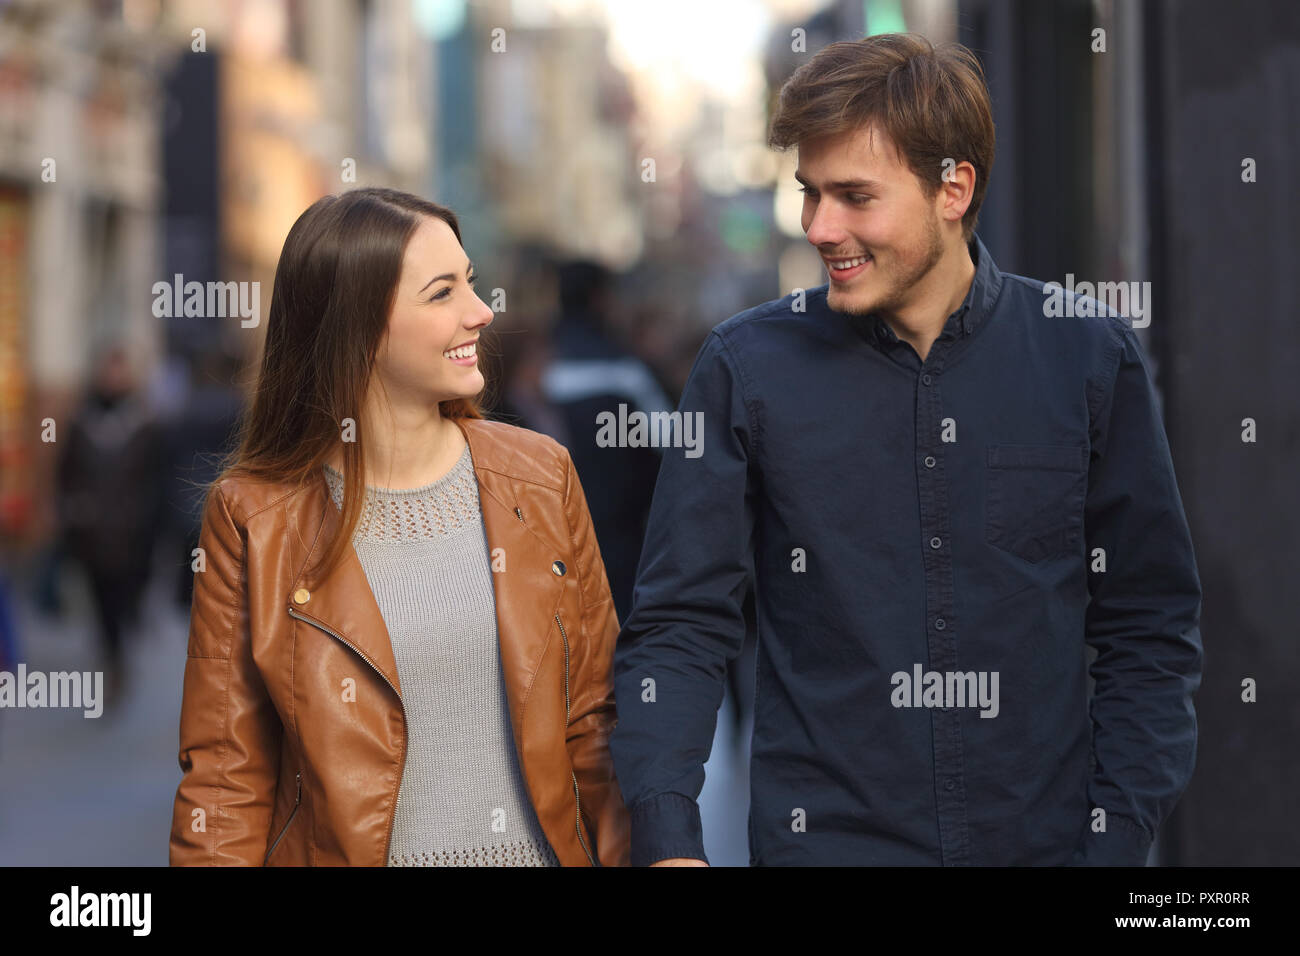 Front view portrait of a happy couple walking and talking in the street Stock Photo